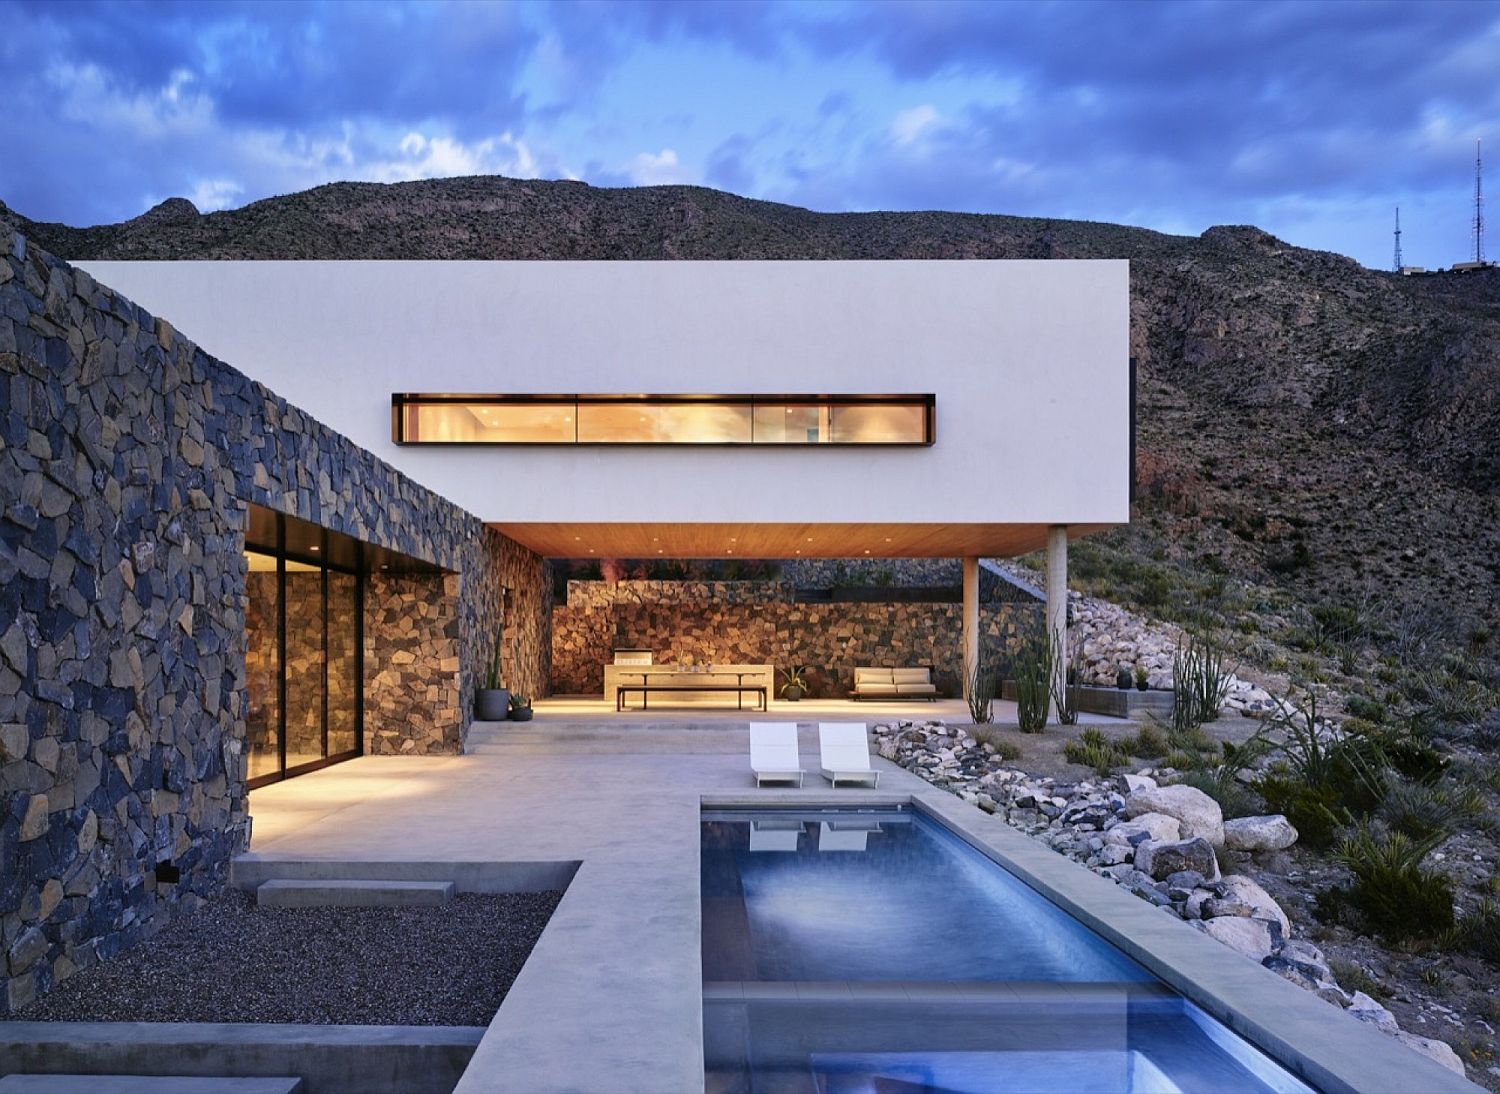 Stone-and-smooth-troweled-stucco-shape-the-exterior-of-the-El-Paso-home